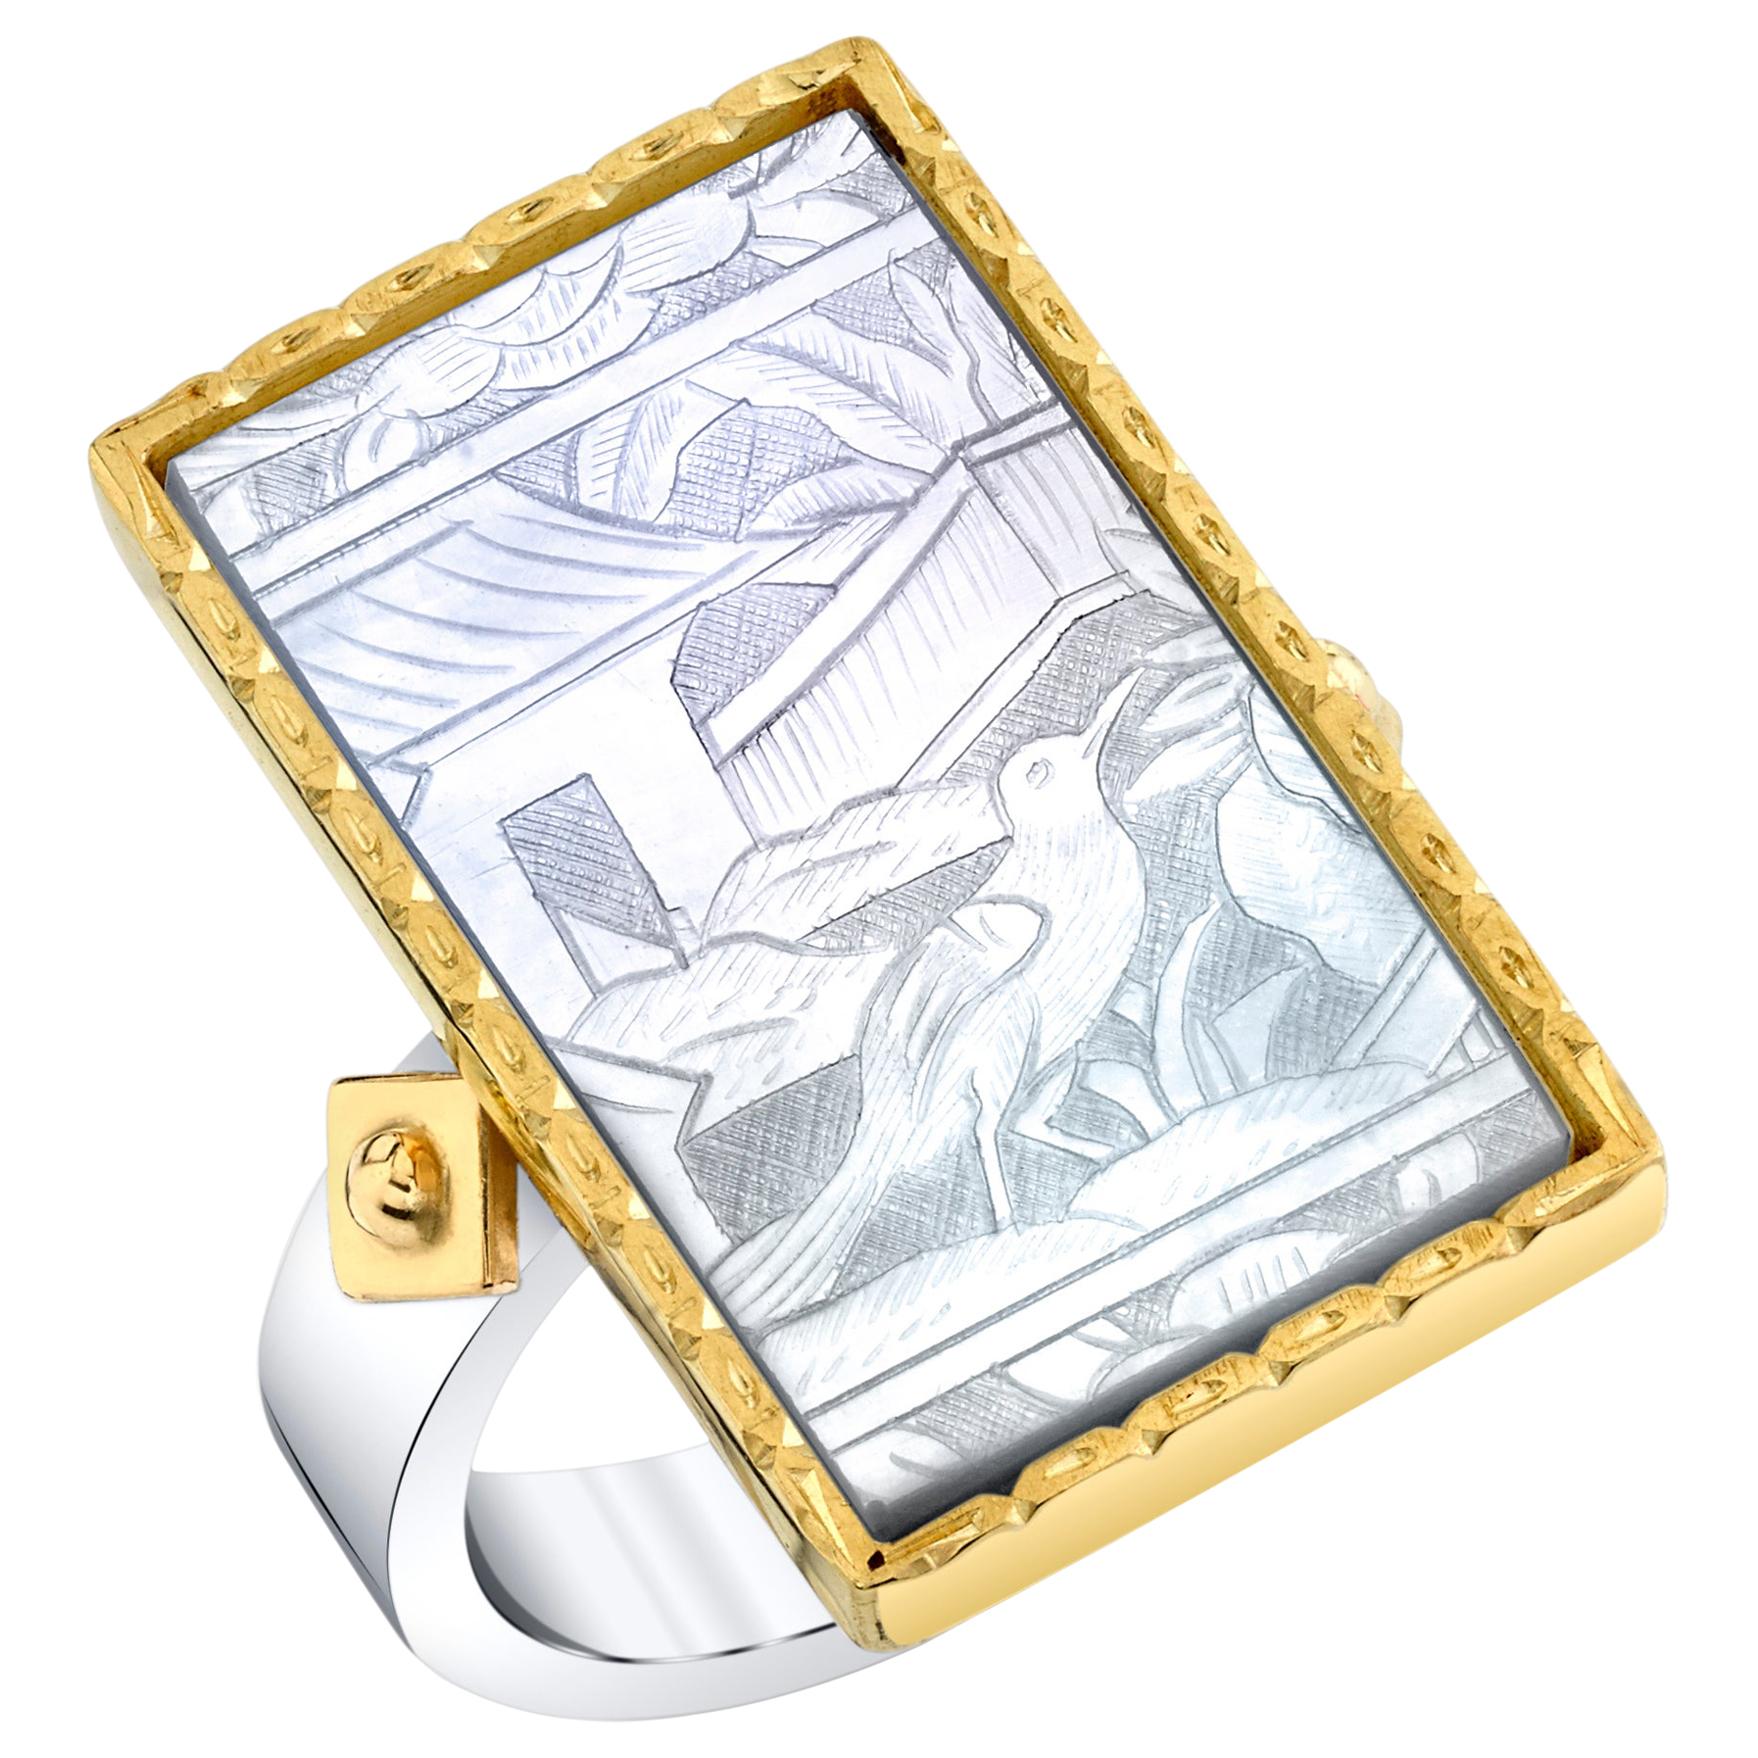 Bezel Set Antique Mother of Pearl Gaming Counter, Silver and Yellow Gold Ring